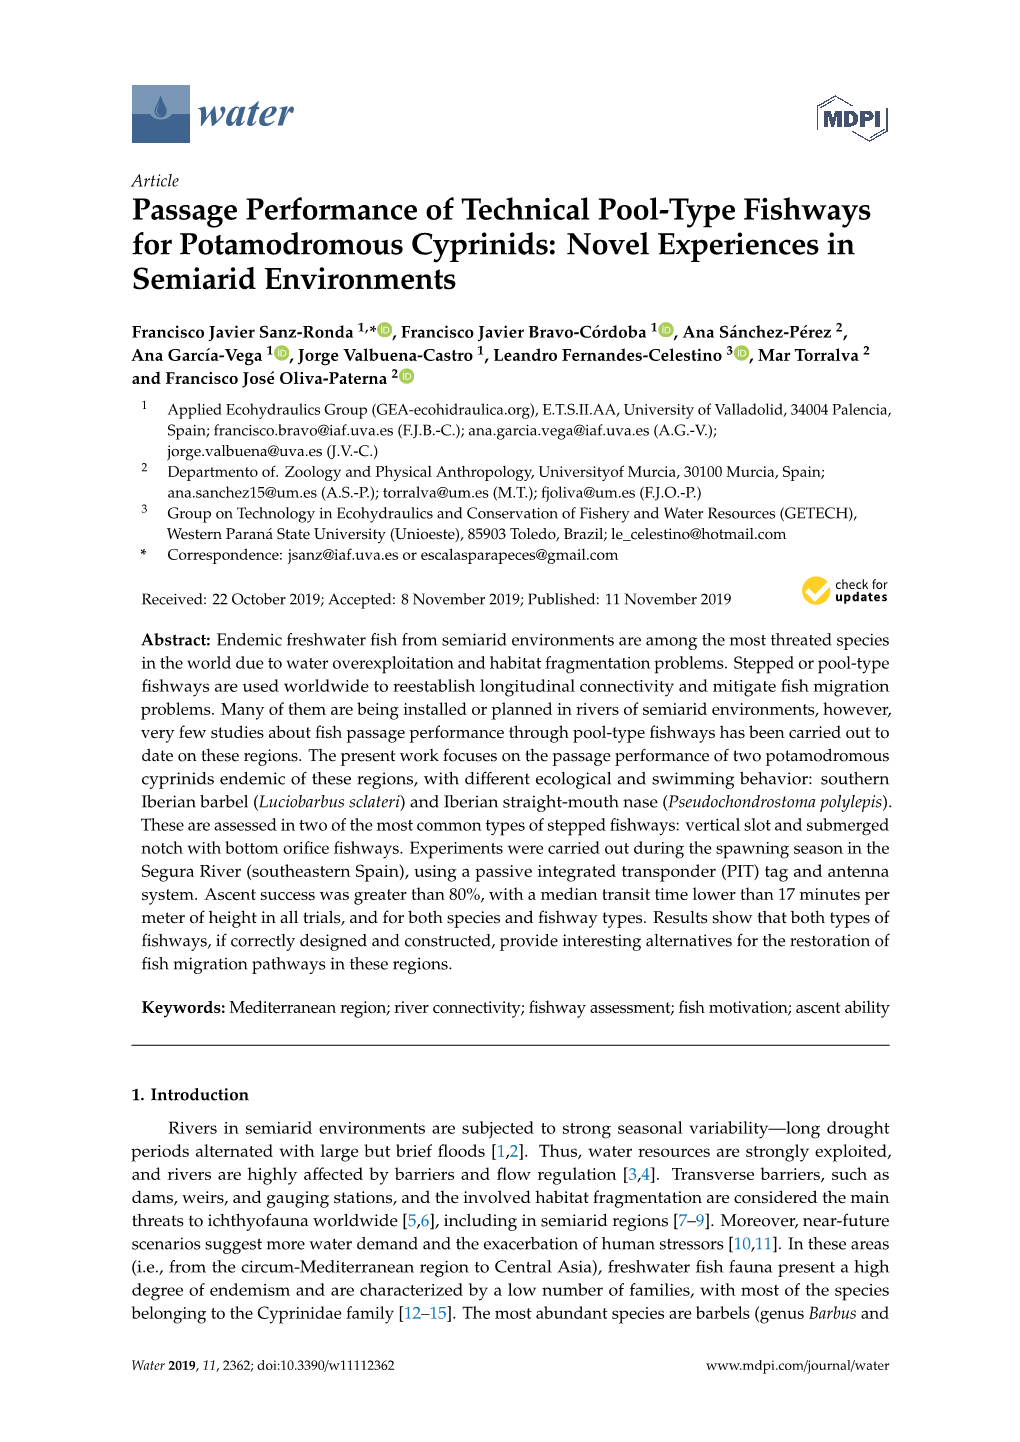 Passage Performance of Technical Pool-Type Fishways for Potamodromous Cyprinids: Novel Experiences in Semiarid Environments